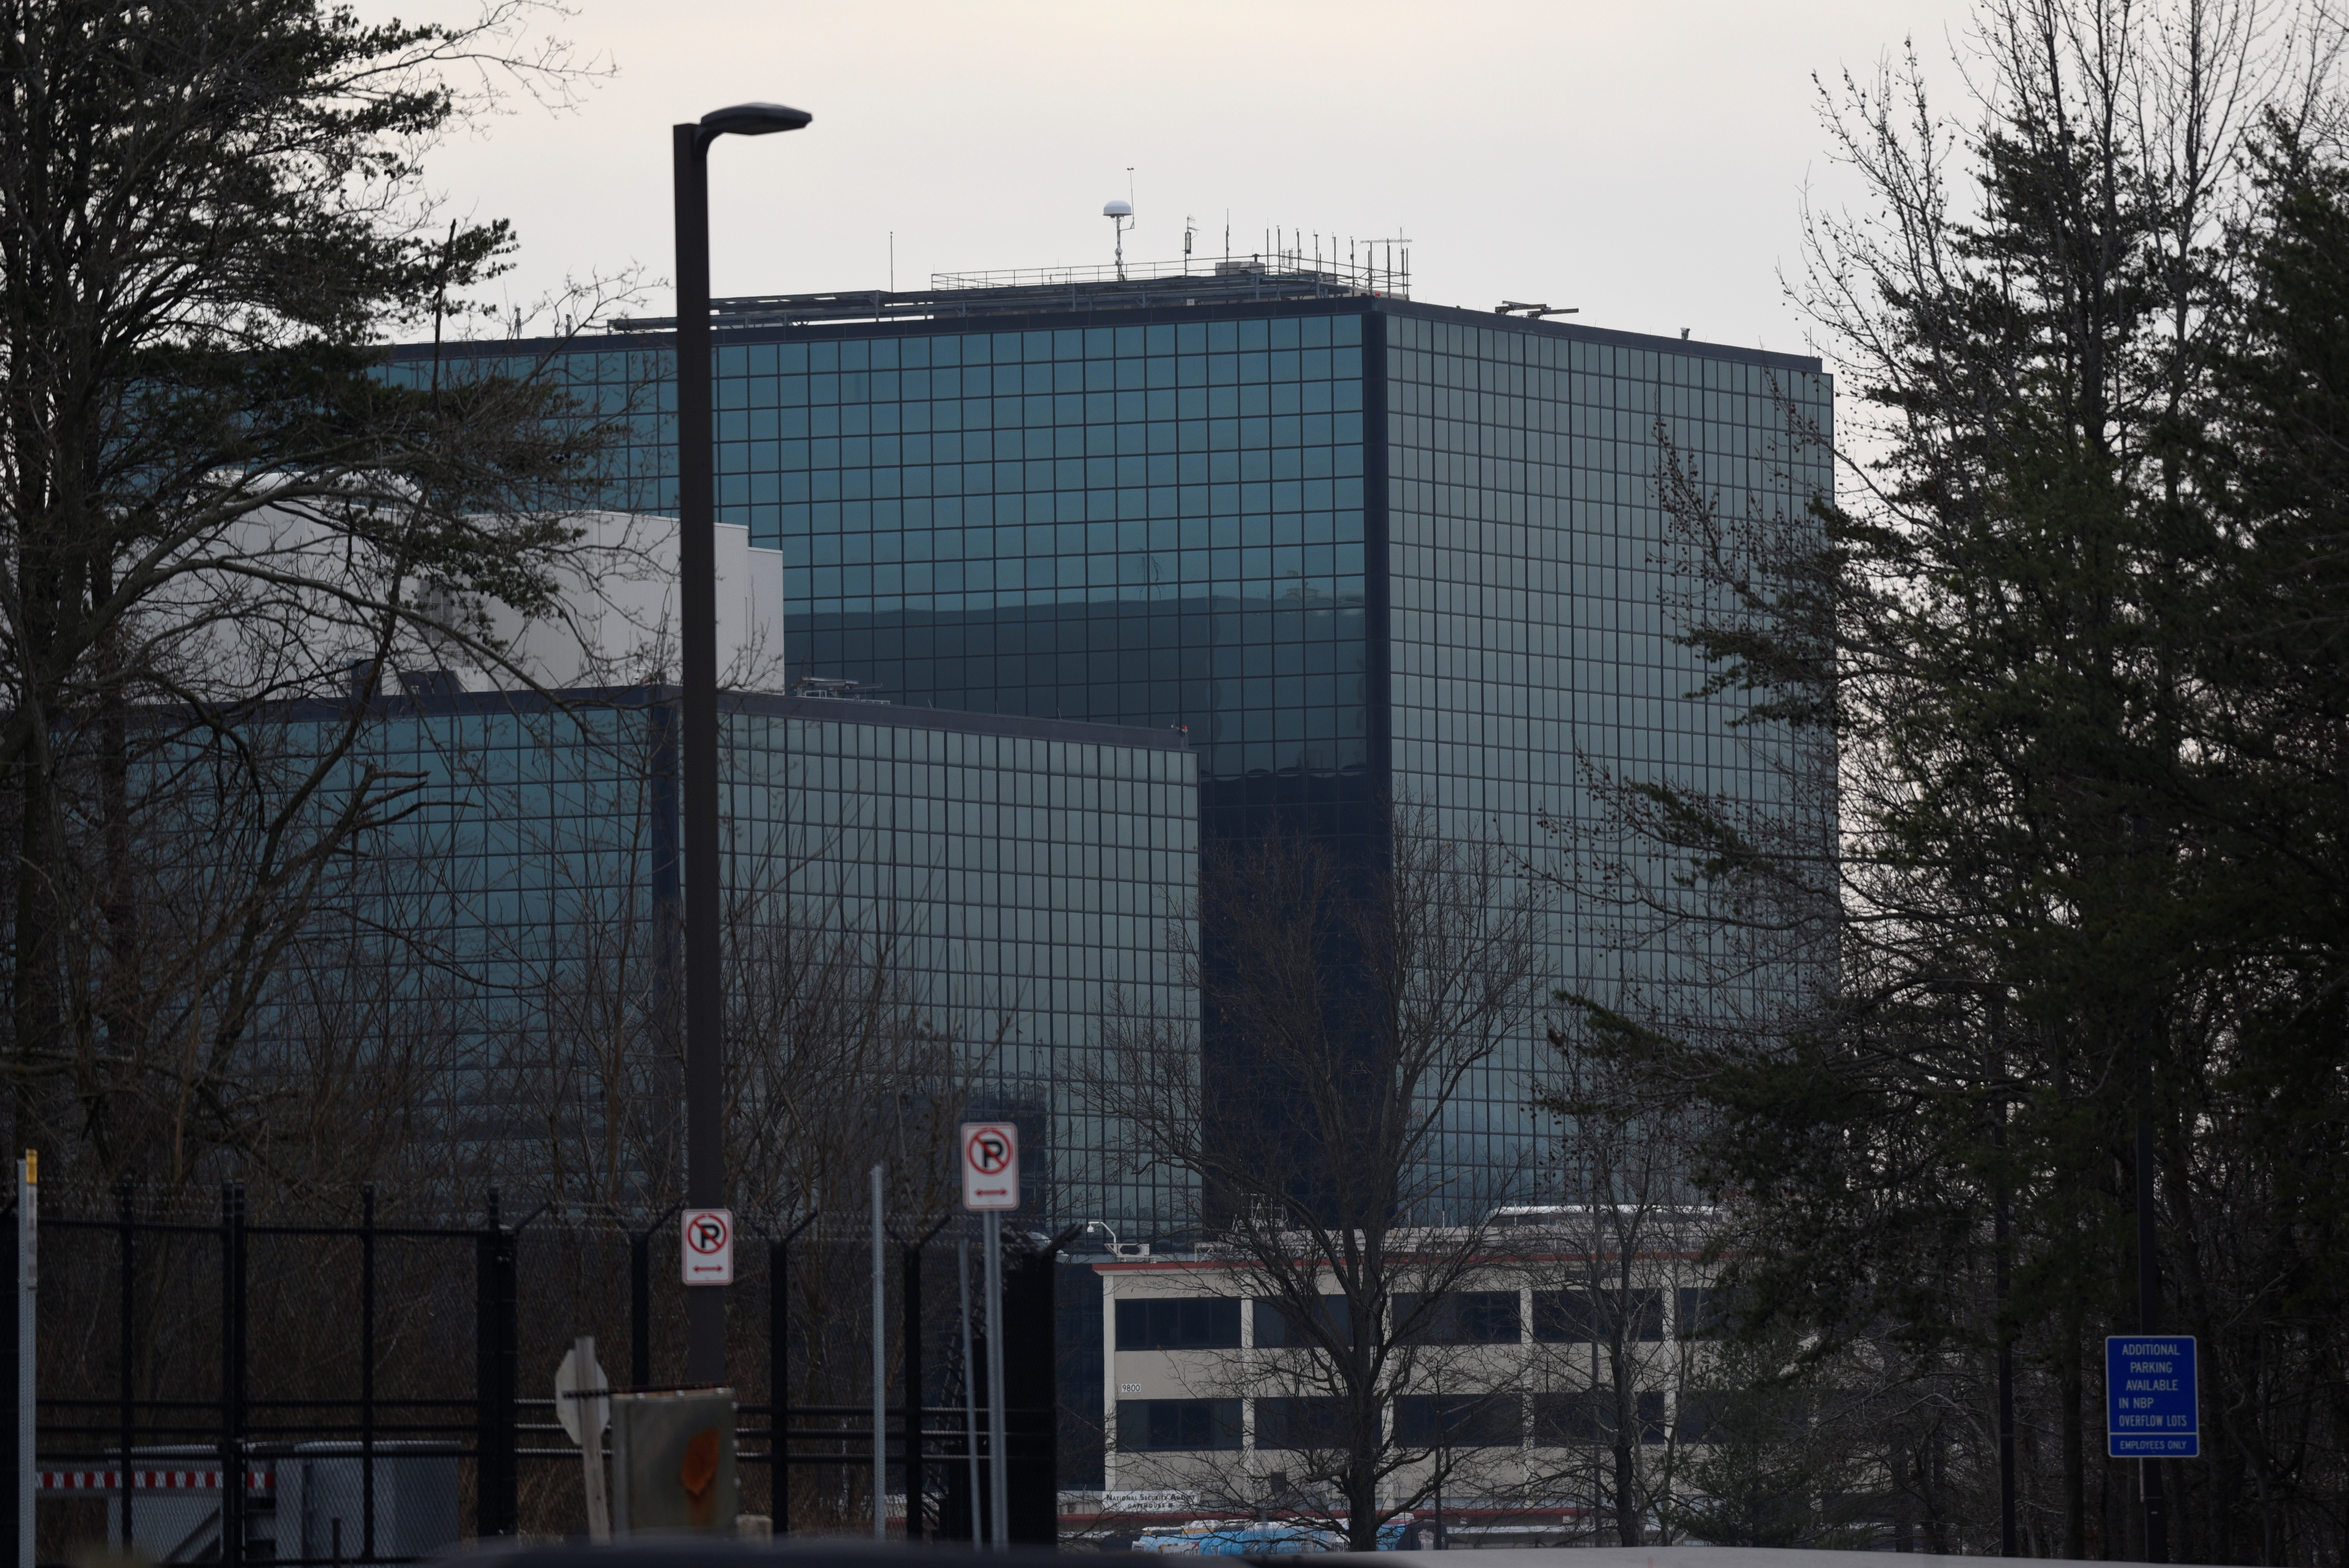 The National Security Agency (NSA) headquarters is seen in Fort Meade, Maryland